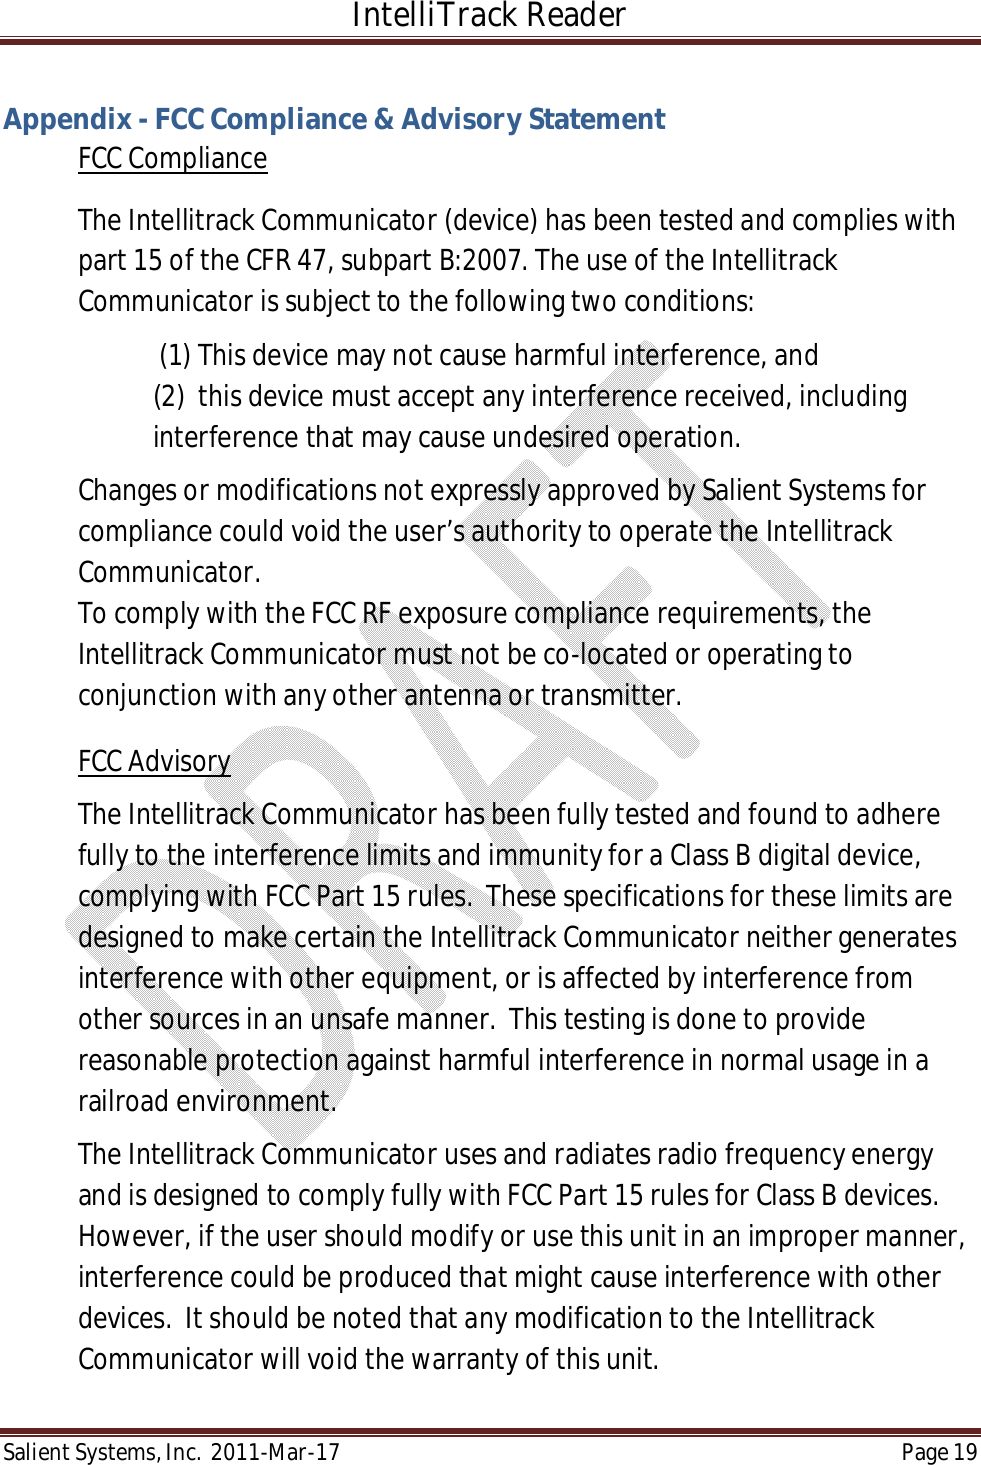 IntelliTrack Reader  Salient Systems, Inc.  2011-Mar-17 Page 19  Appendix - FCC Compliance &amp; Advisory Statement FCC Compliance The Intellitrack Communicator (device) has been tested and complies with part 15 of the CFR 47, subpart B:2007. The use of the Intellitrack Communicator is subject to the following two conditions:    (1) This device may not cause harmful interference, and  (2)  this device must accept any interference received, including interference that may cause undesired operation. Changes or modifications not expressly approved by Salient Systems for compliance could void the user’s authority to operate the Intellitrack Communicator. To comply with the FCC RF exposure compliance requirements, the Intellitrack Communicator must not be co-located or operating to conjunction with any other antenna or transmitter. FCC Advisory The Intellitrack Communicator has been fully tested and found to adhere fully to the interference limits and immunity for a Class B digital device, complying with FCC Part 15 rules.  These specifications for these limits are designed to make certain the Intellitrack Communicator neither generates interference with other equipment, or is affected by interference from other sources in an unsafe manner.  This testing is done to provide reasonable protection against harmful interference in normal usage in a railroad environment.    The Intellitrack Communicator uses and radiates radio frequency energy and is designed to comply fully with FCC Part 15 rules for Class B devices. However, if the user should modify or use this unit in an improper manner, interference could be produced that might cause interference with other devices.  It should be noted that any modification to the Intellitrack Communicator will void the warranty of this unit.  